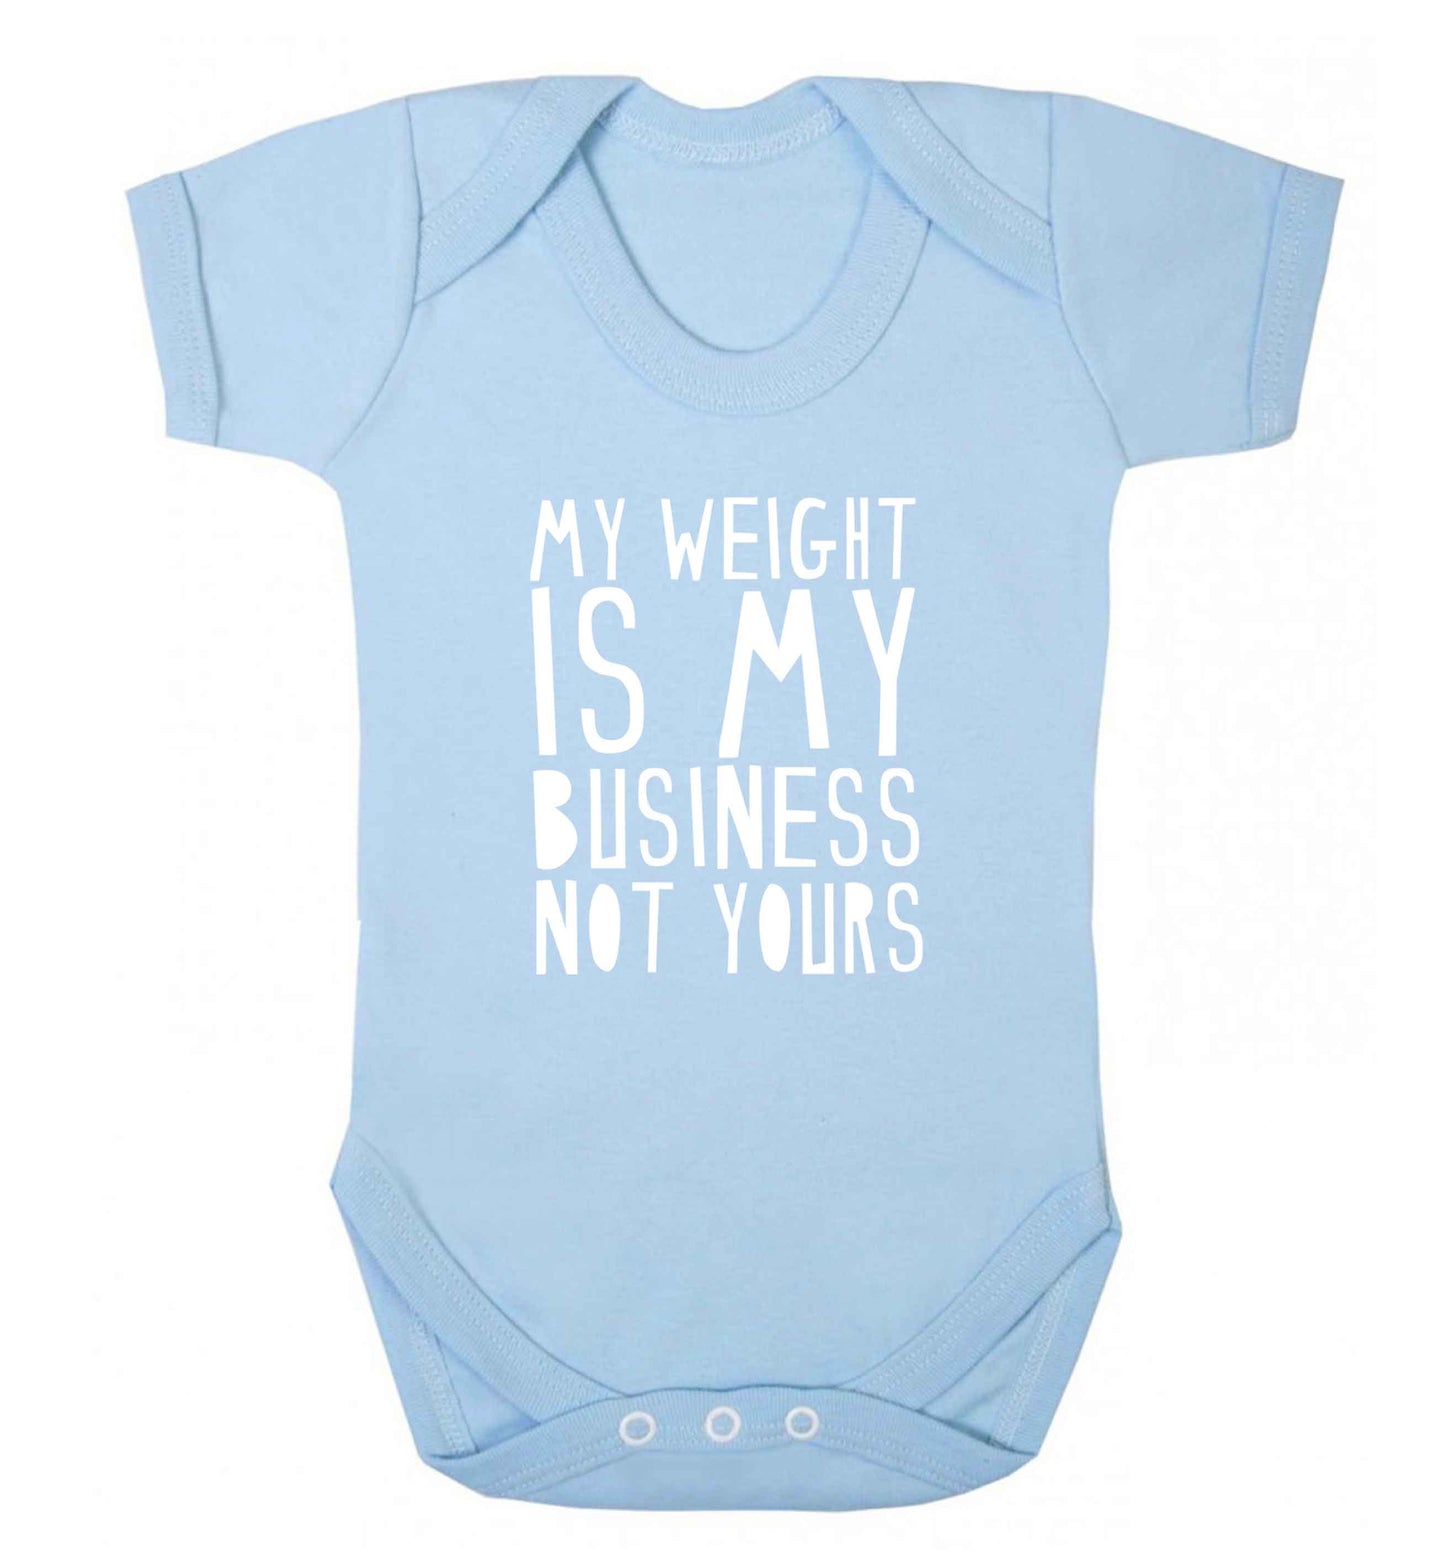 My weight is my business not yours baby vest pale blue 18-24 months